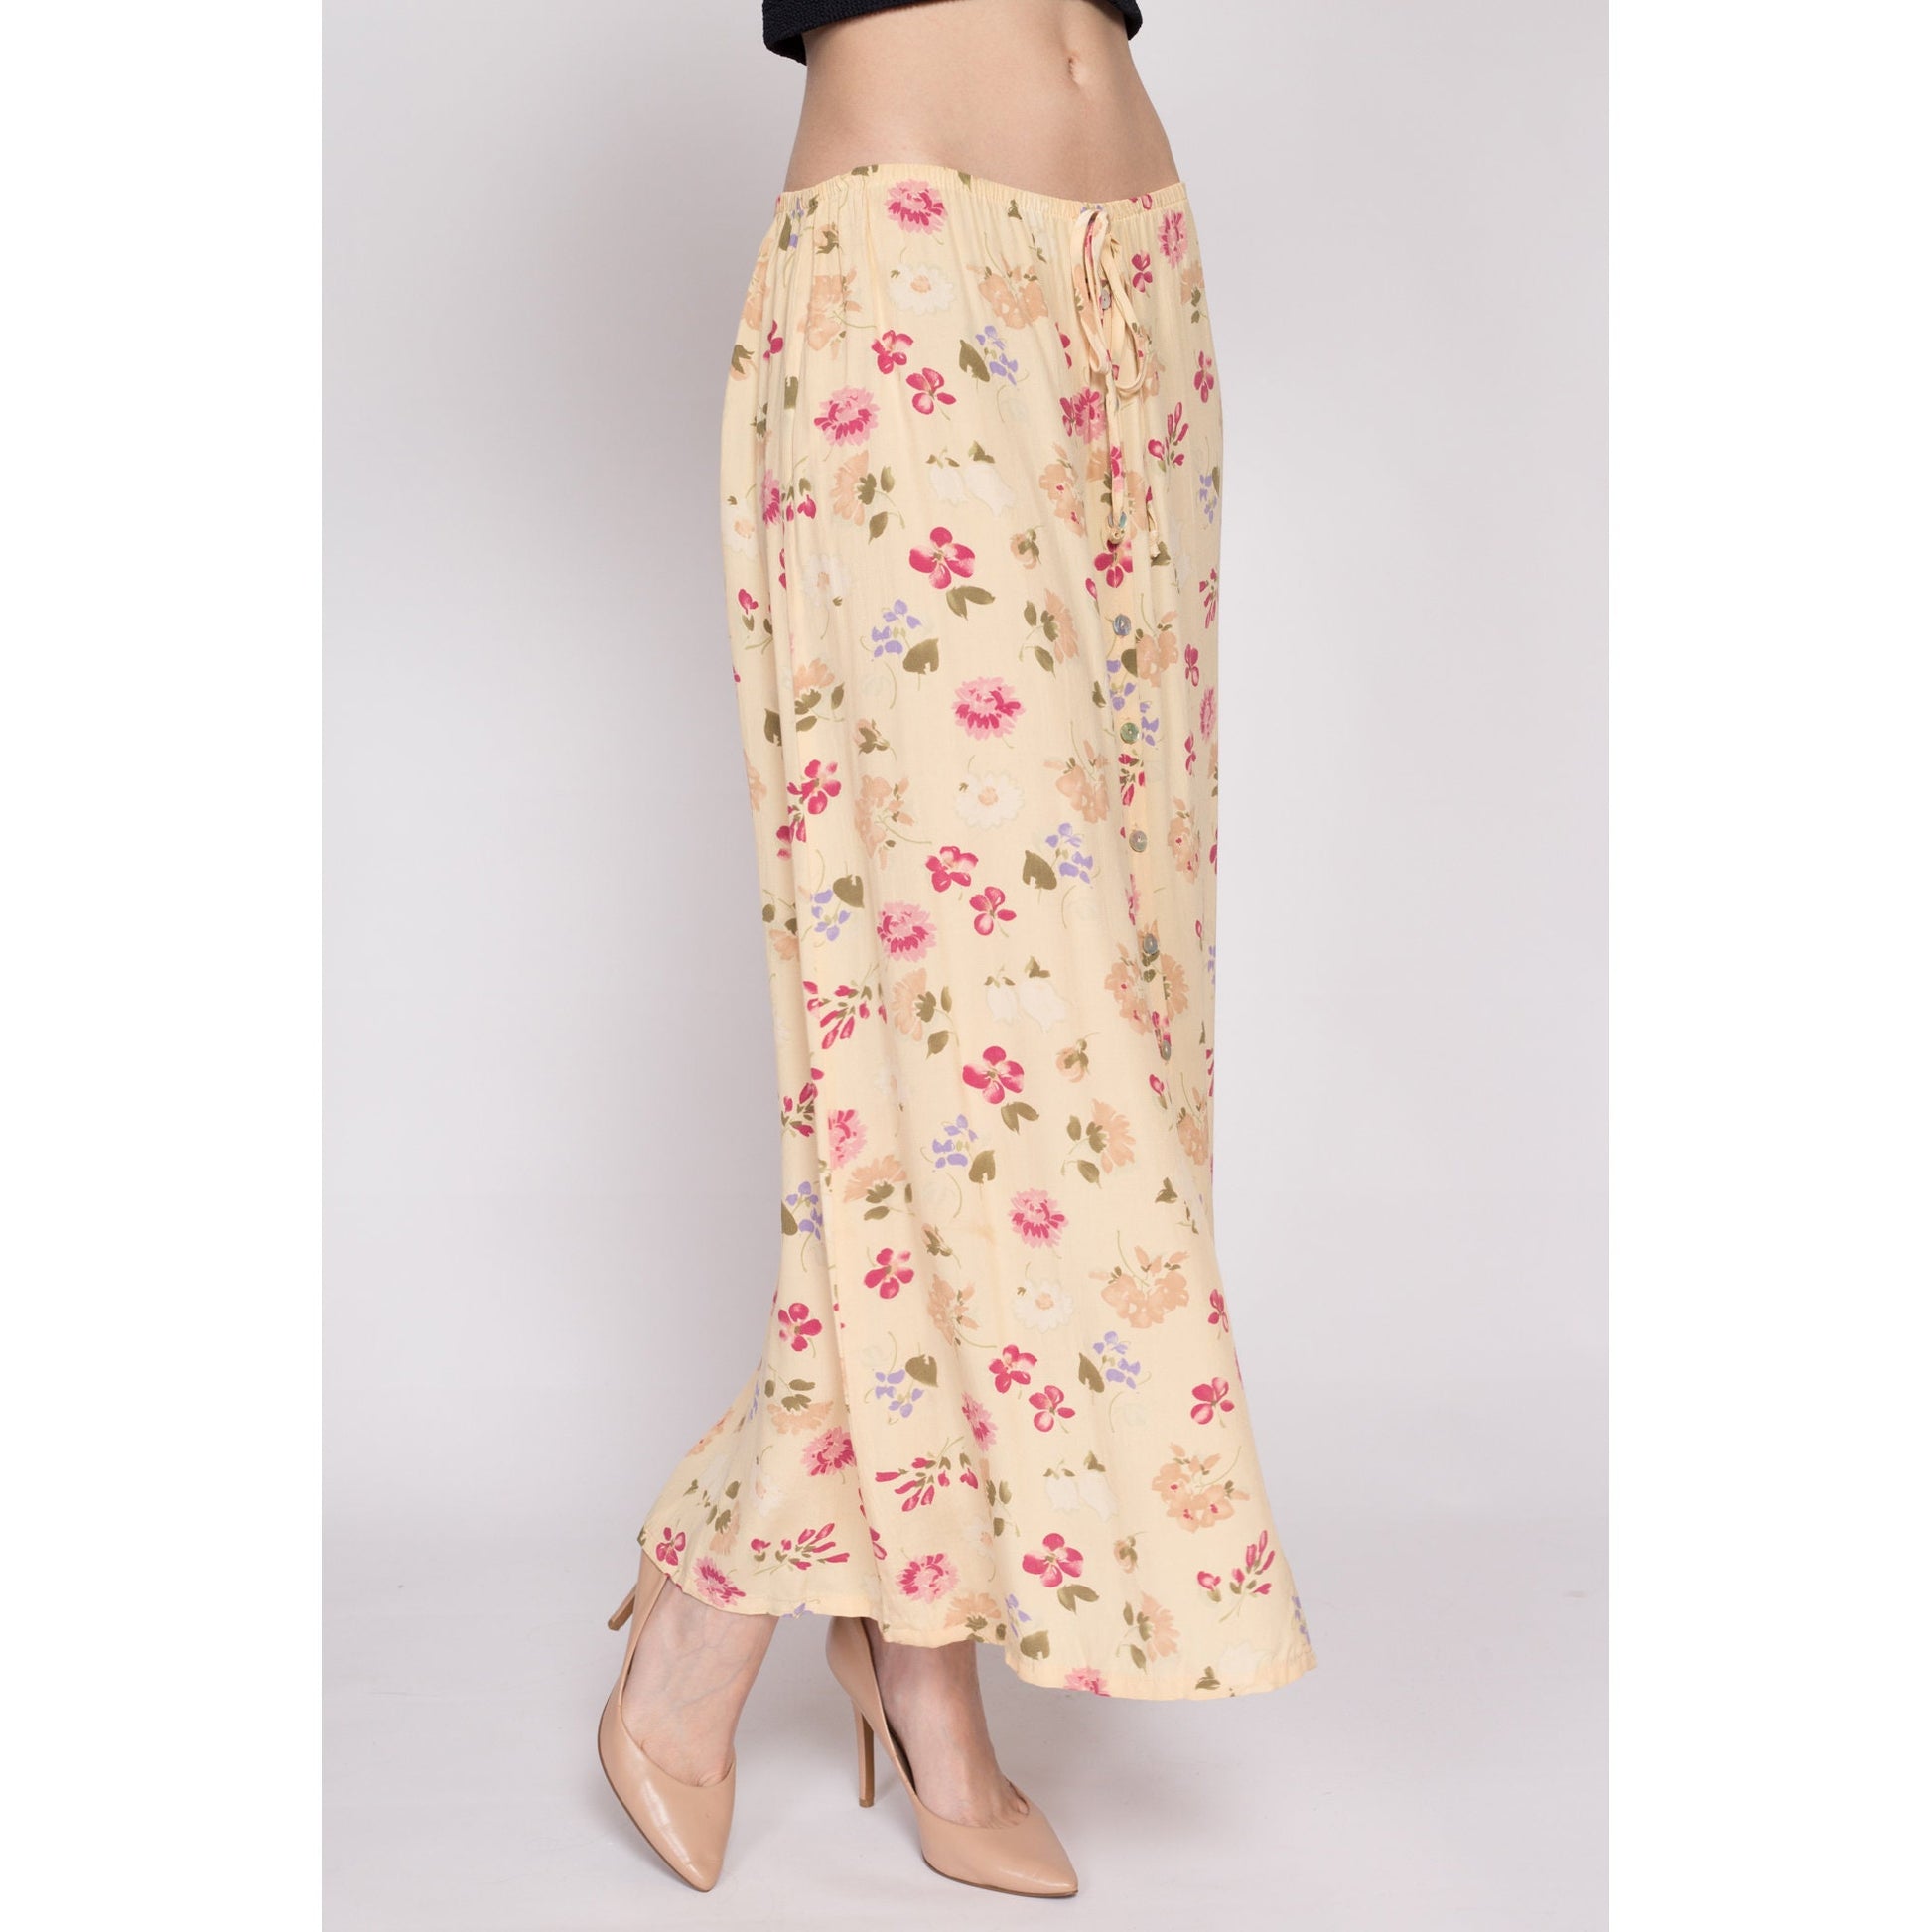 M| 90s Butter Yellow Floral A Line Skirt - Medium | Vintage High Waisted Button Front Boho Midi Skirt